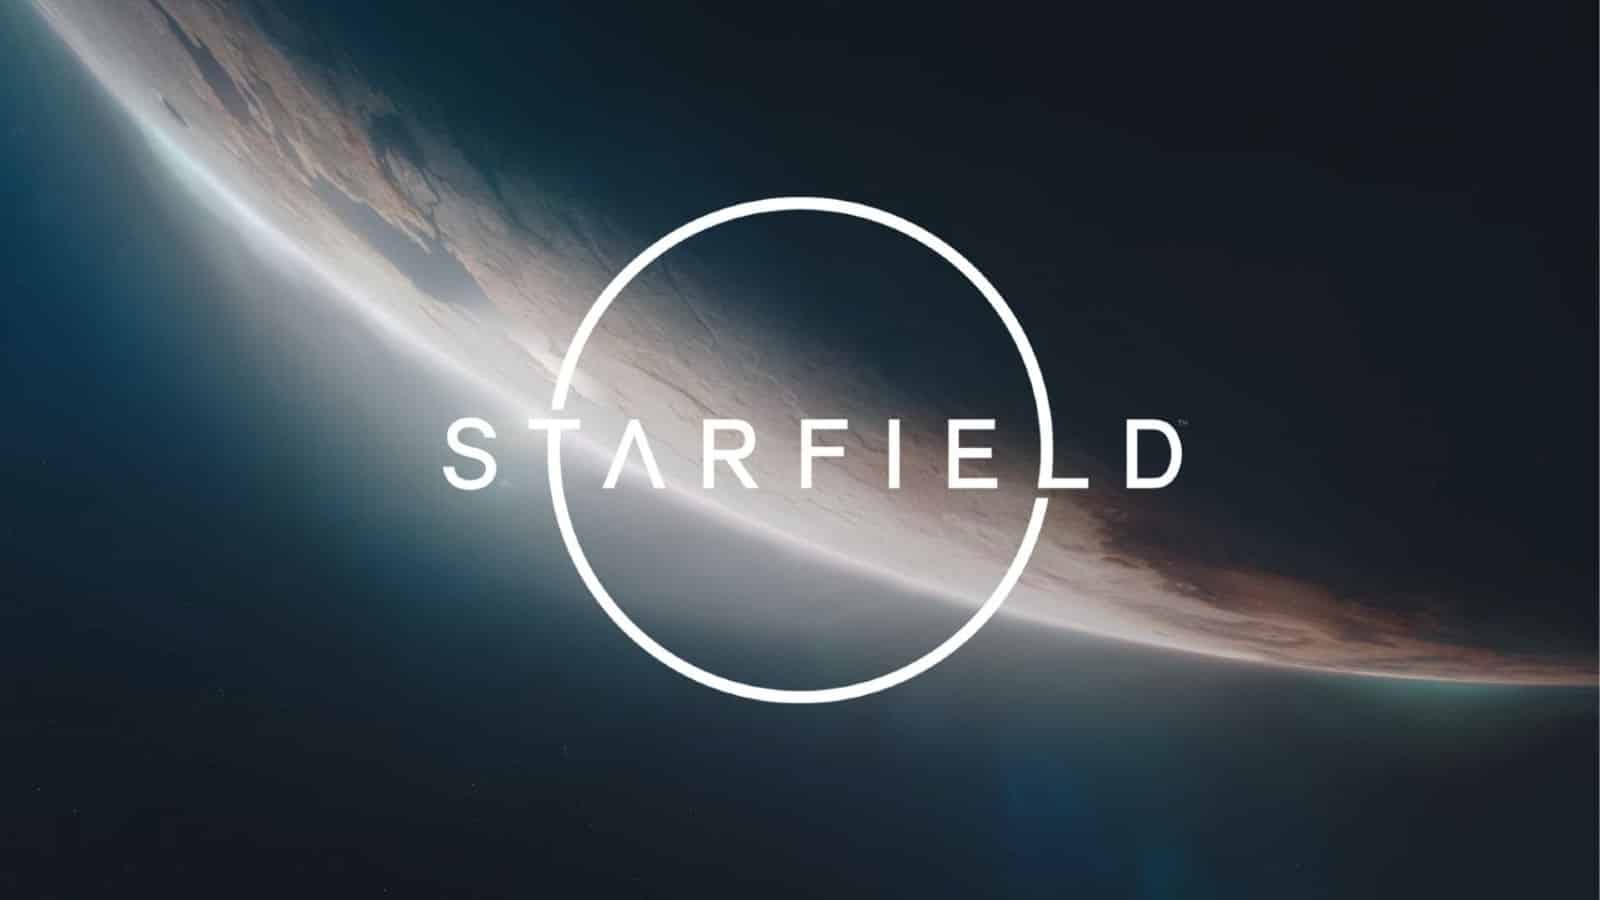 Starfield gameplay reveals character creation, ship combat, and over 1,000 planets to explore